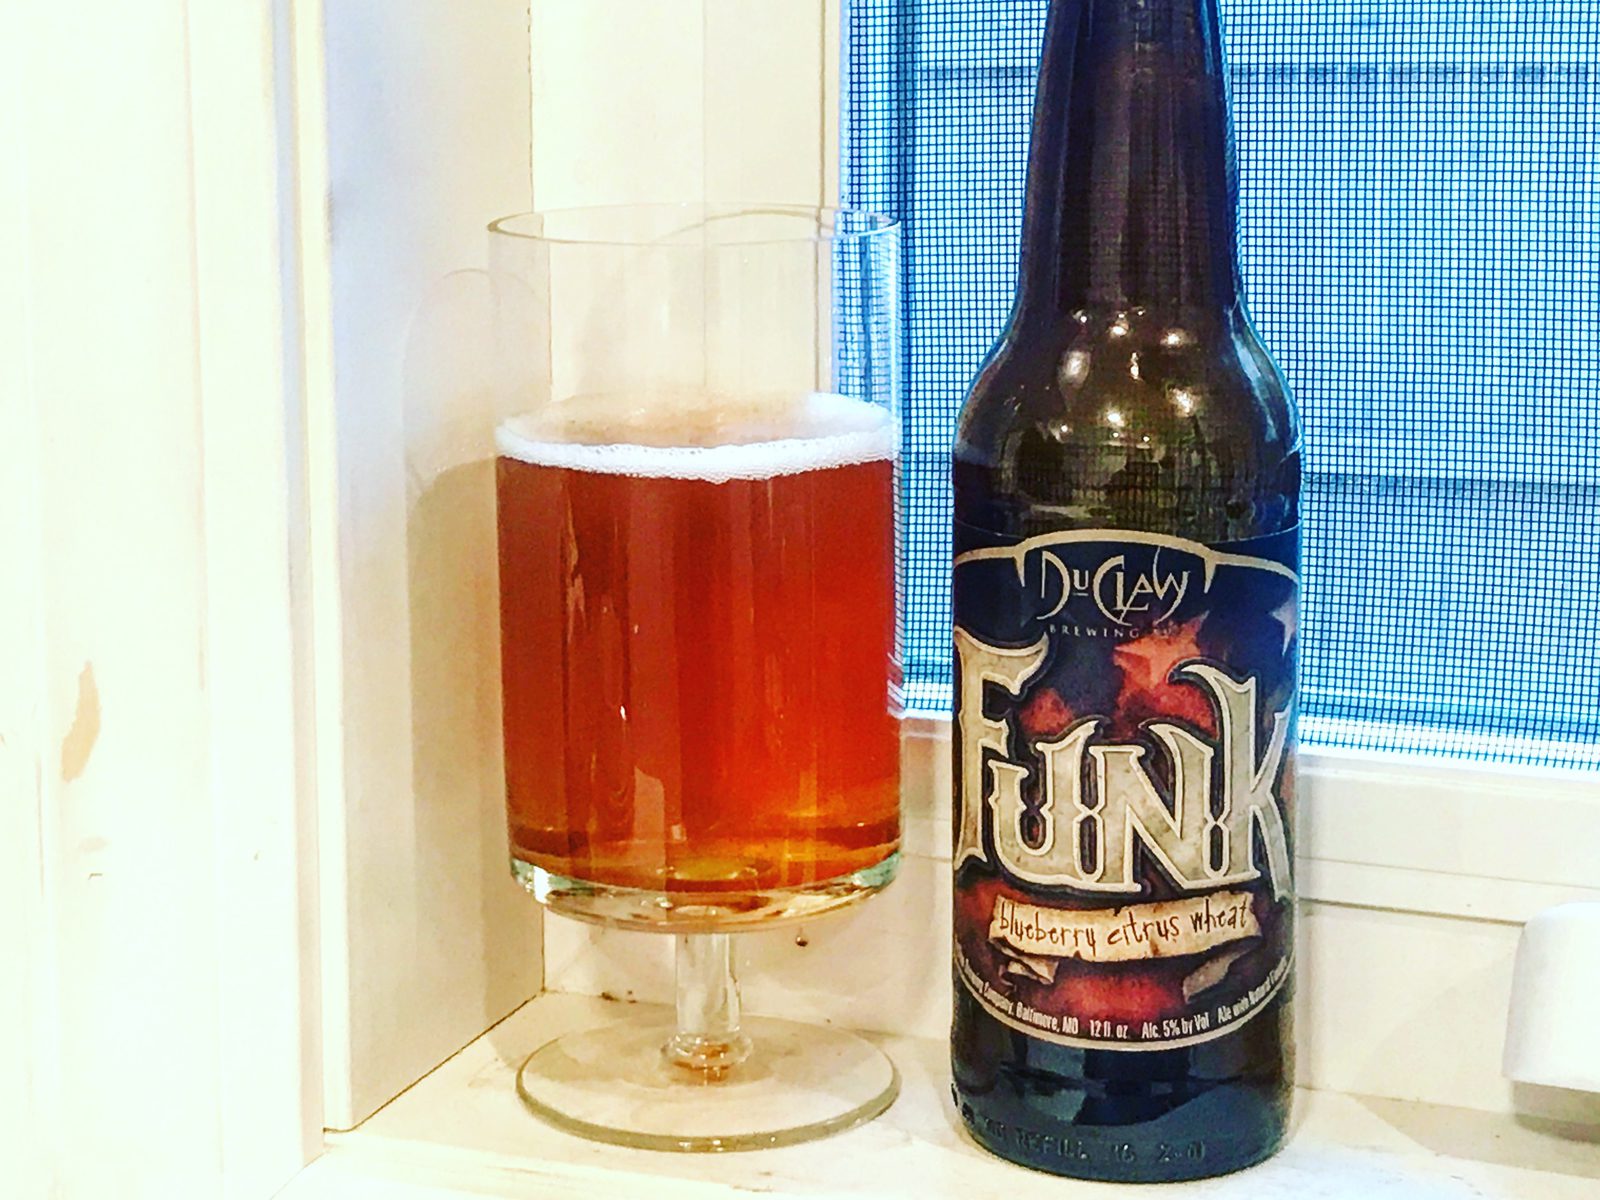 DuClaw Brewing Company: Funk (Blueberry Citrus Wheat)